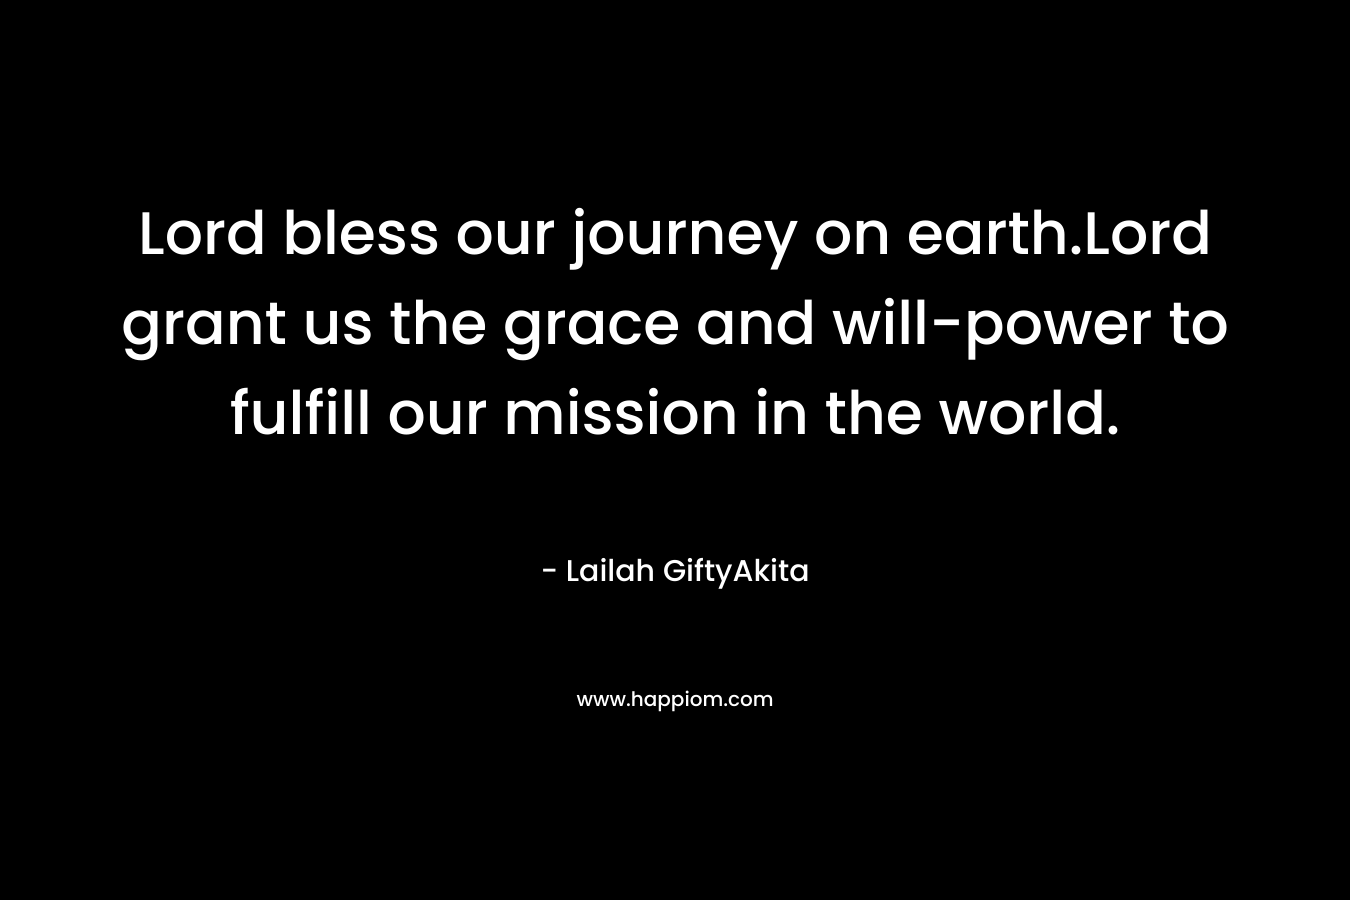 Lord bless our journey on earth.Lord grant us the grace and will-power to fulfill our mission in the world.